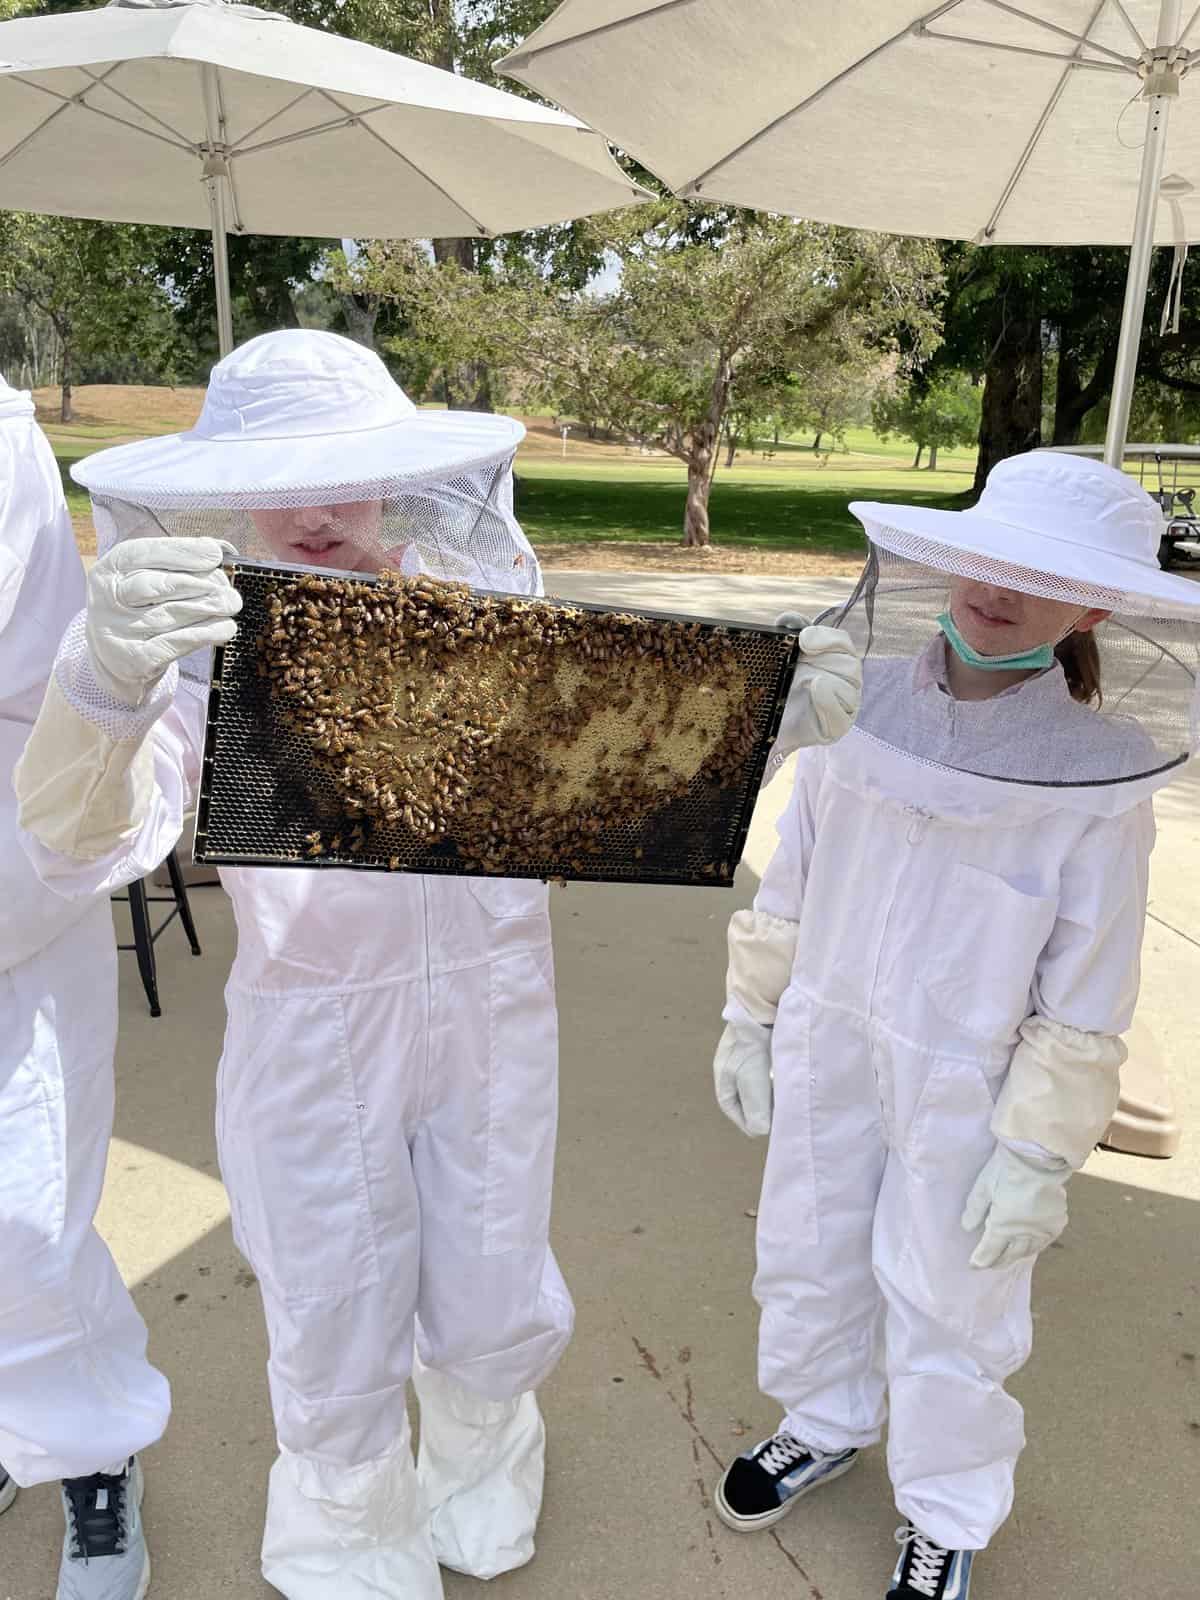 CJ holding a tray of bees